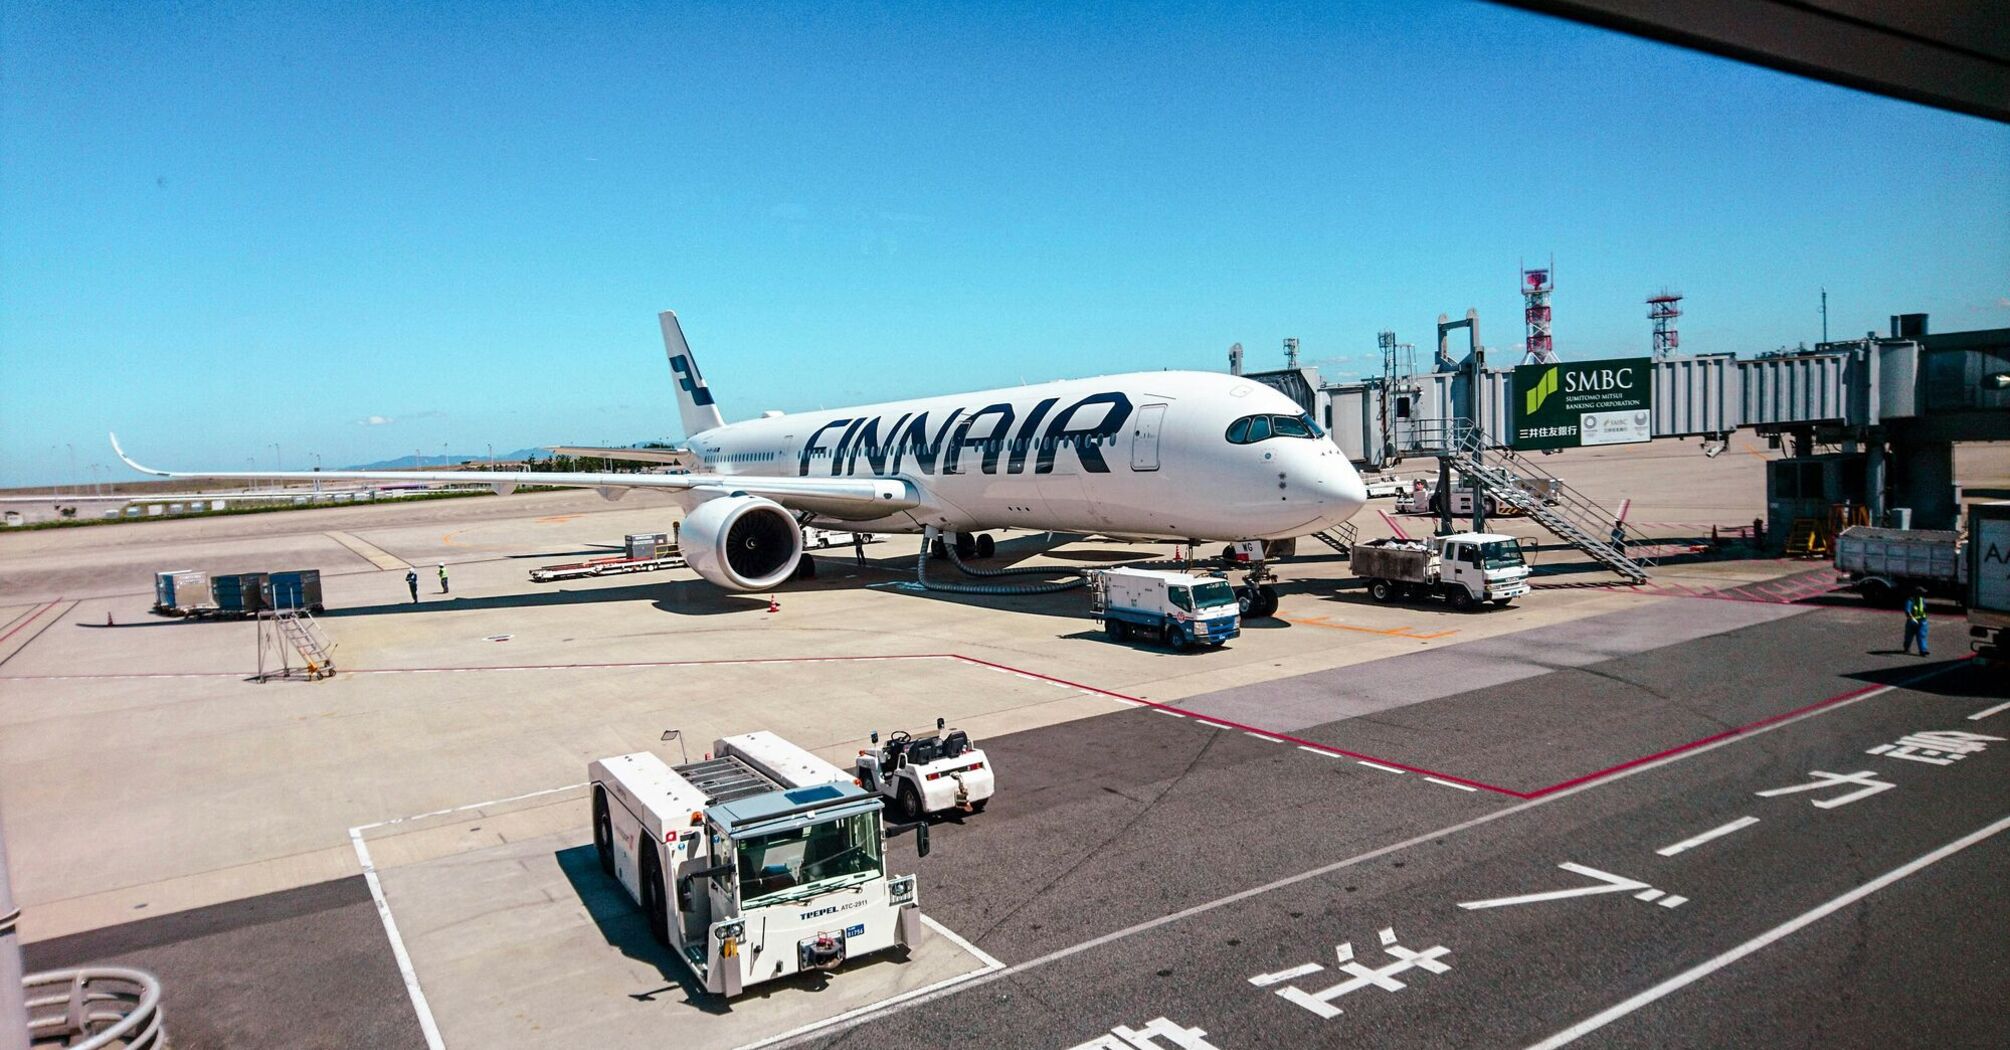 Finnair airplane is parked at an airport